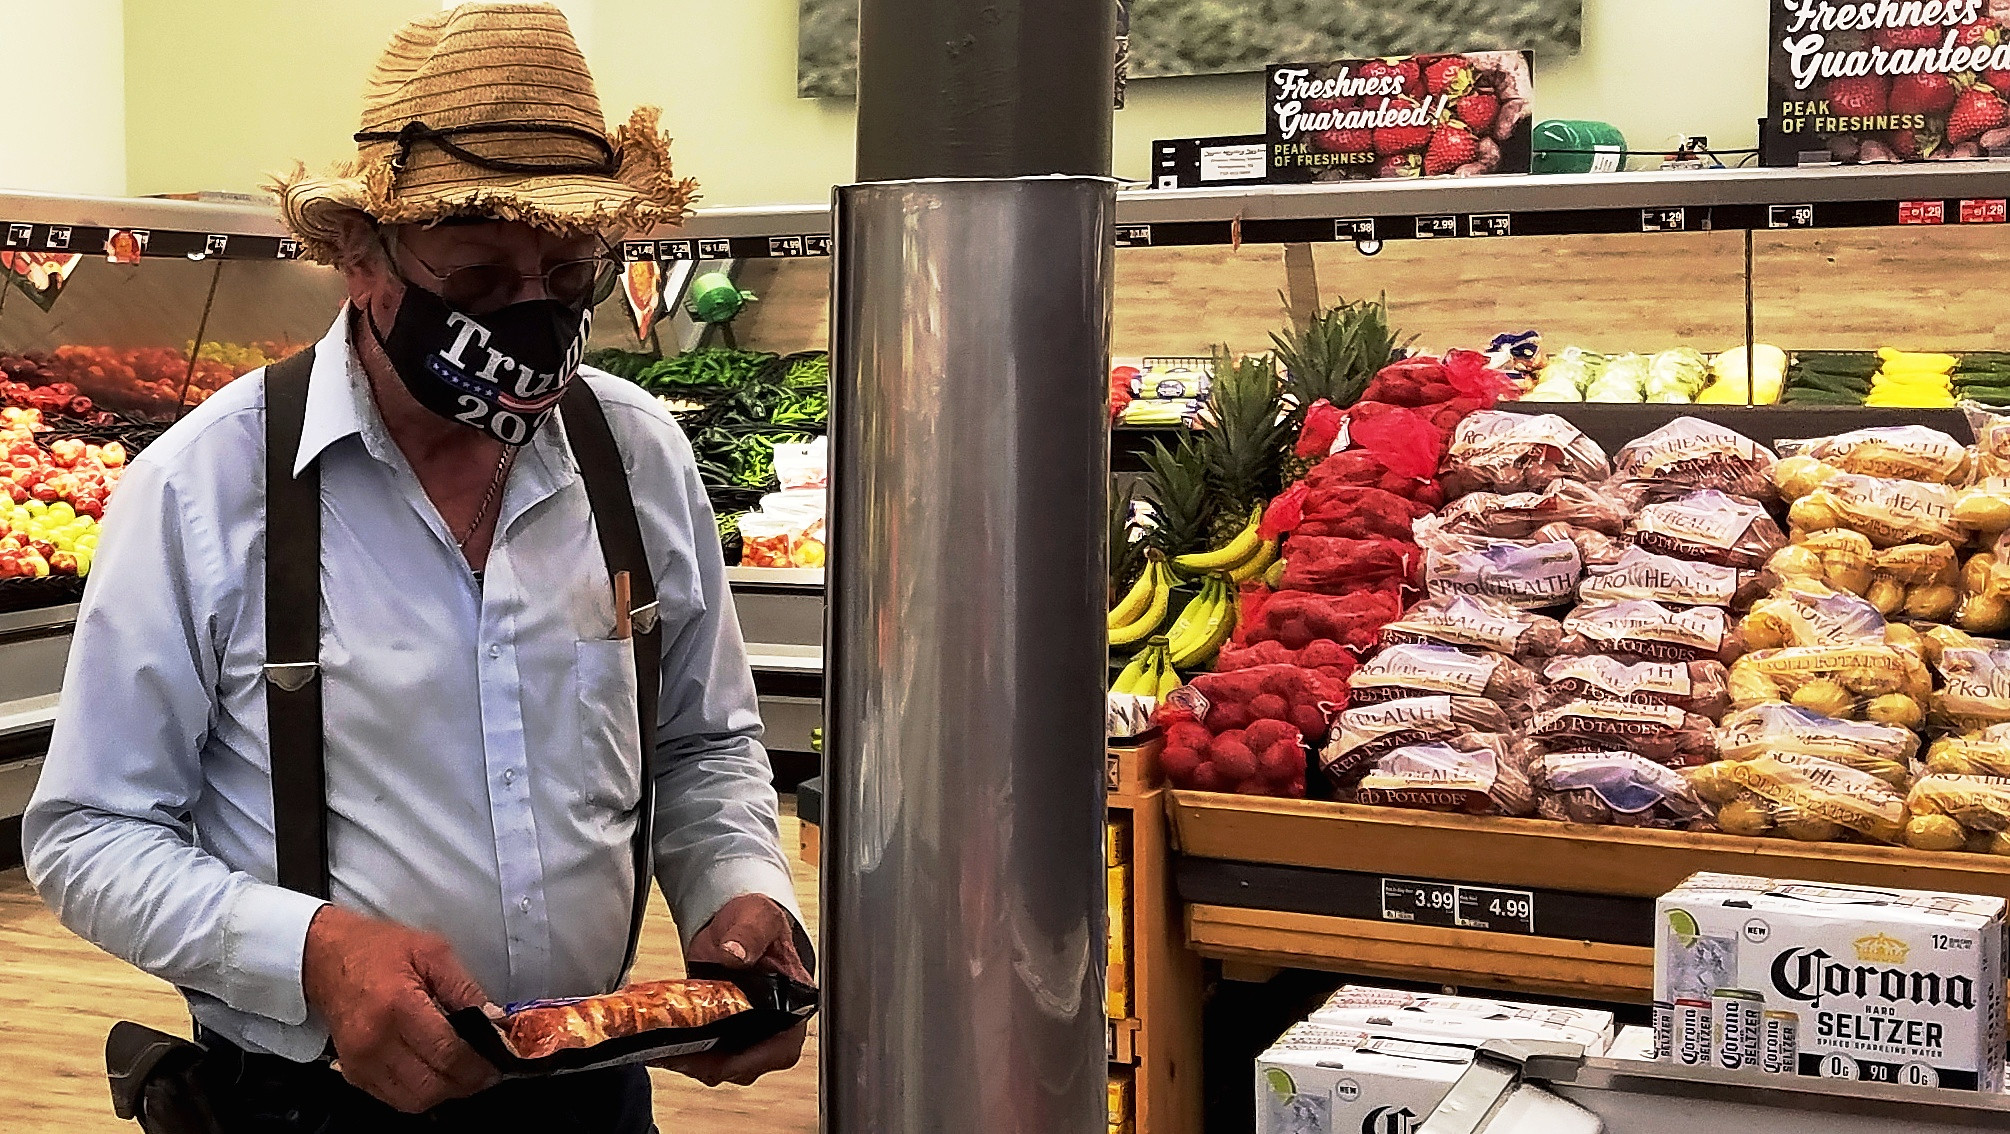 Man with a straw hat & a Trump 2020 COVID-19 face mask at supermarket